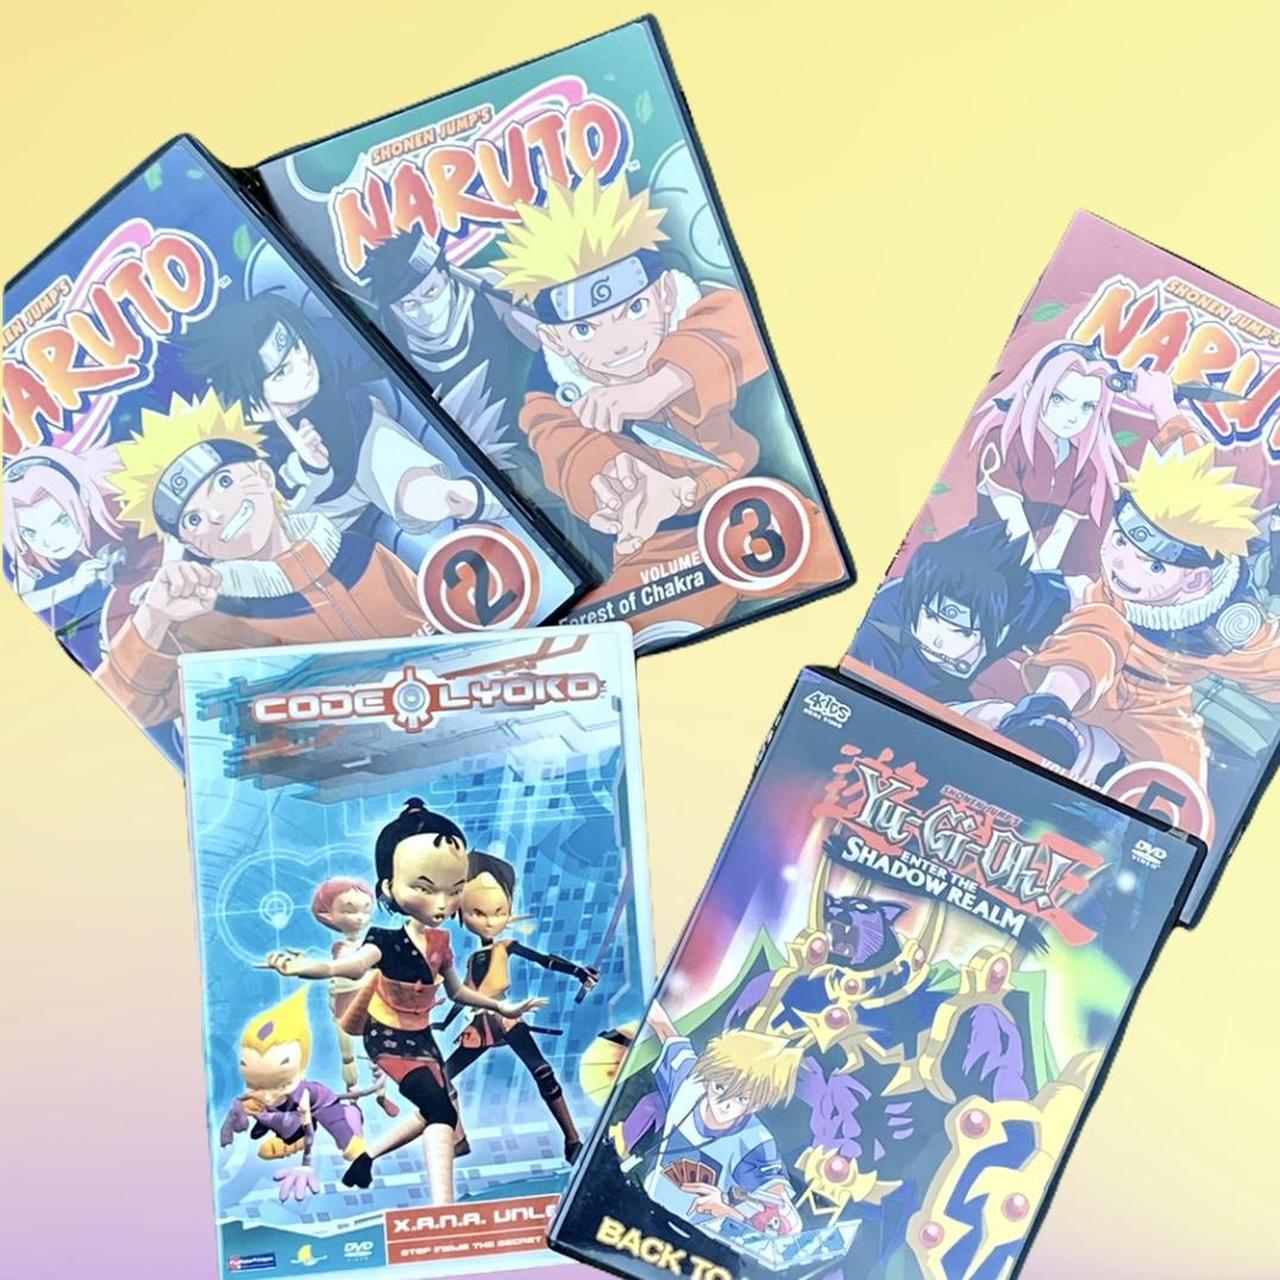 Naruto: Vol. 3 - The Forest Of Chakra 